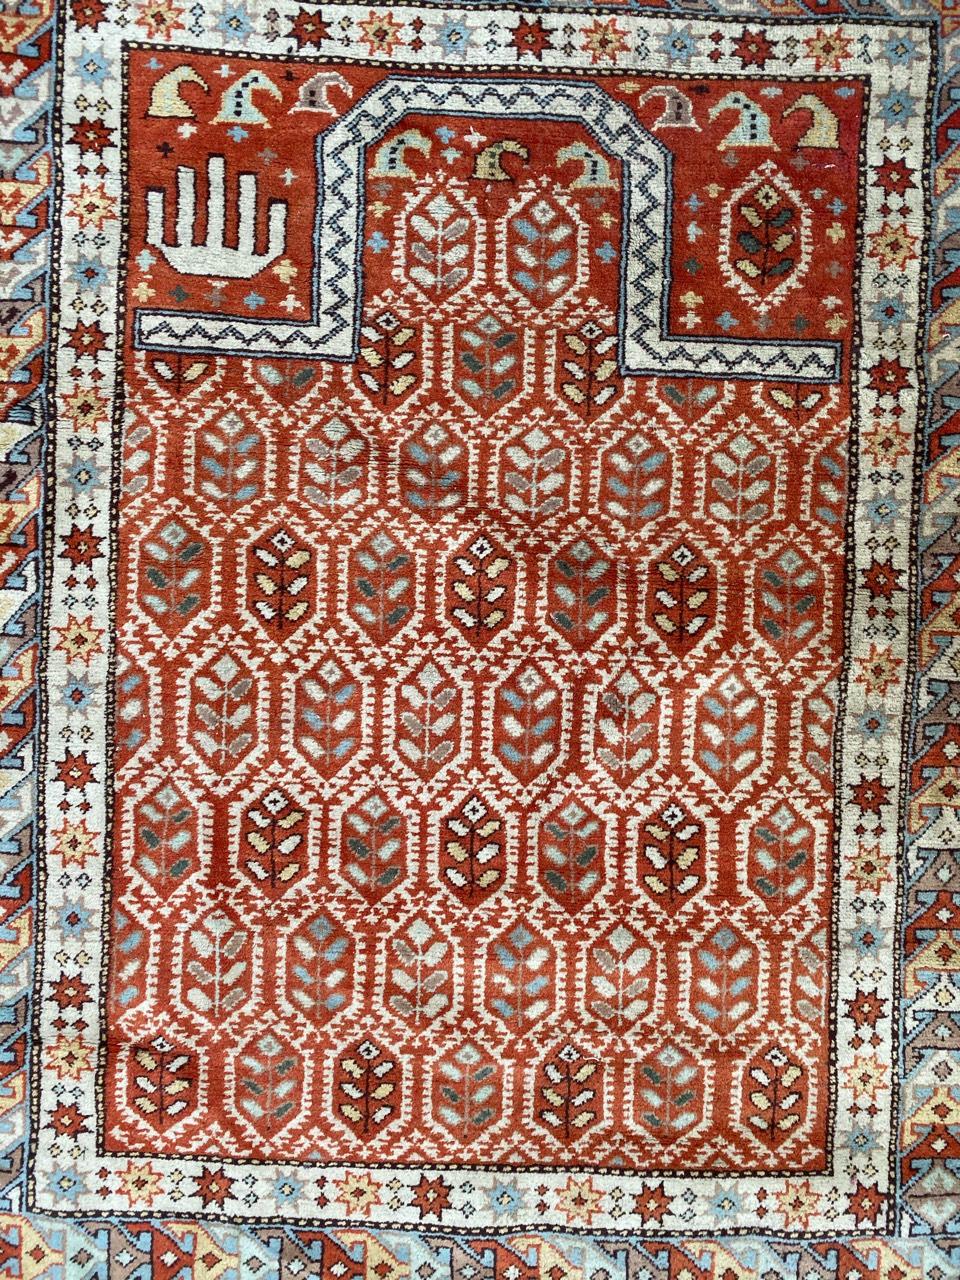 Very beautiful late 20th century Anatolian rug with a nice Mihrab design and beautiful colors with orange, grey, yellow and blue, entirely hand knotted with wool velvet on wool foundation.

✨✨✨
